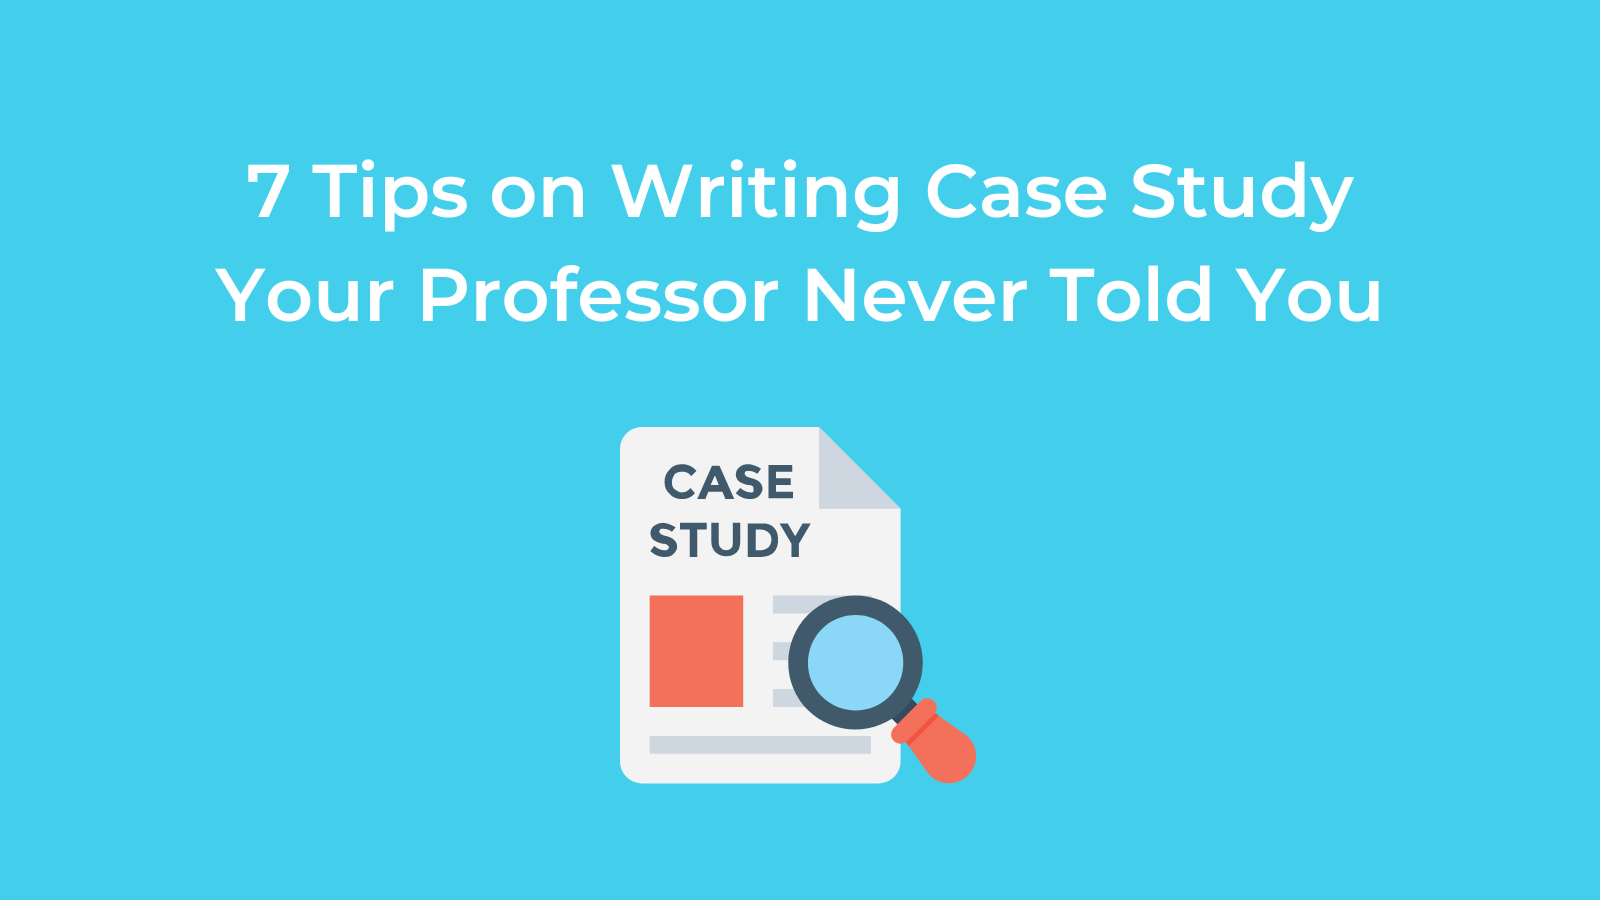 7 Tips on Writing Case Study Your Professor Never Told You